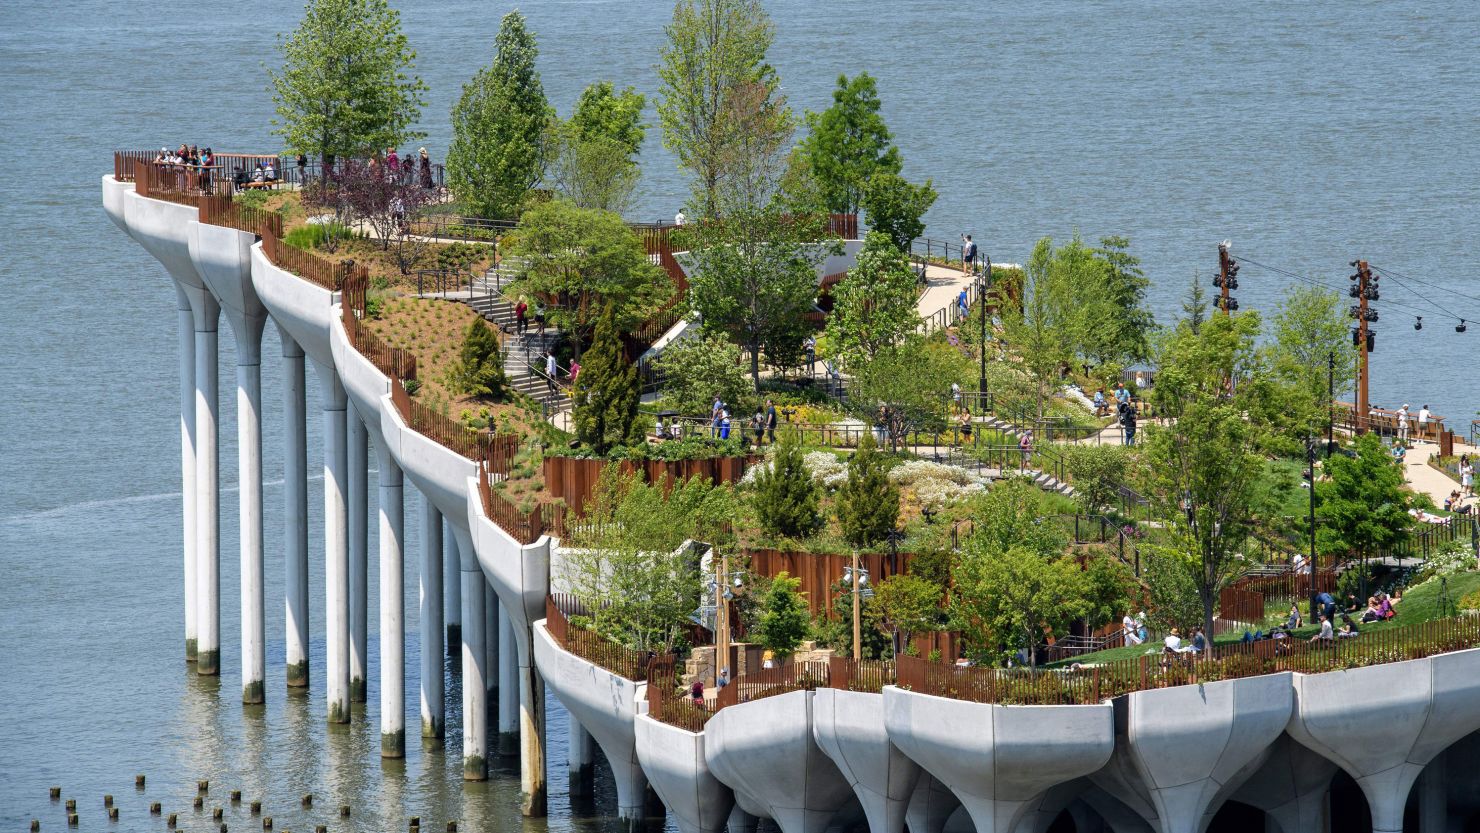 TOPSHOT - View of 'Little Island', a new, free public park in Hudson River Park on May 21, 2021 in New York City. - On 132 huge concrete tulips installed on pillars on the banks of the Hudson River levitates "Little Island", a new floating public park of 260 million dollars inaugurated this sunny Friday in New York to the delight of the population, after more than one year of pandemic. (Photo by Angela Weiss / AFP) (Photo by ANGELA WEISS/AFP via Getty Images)